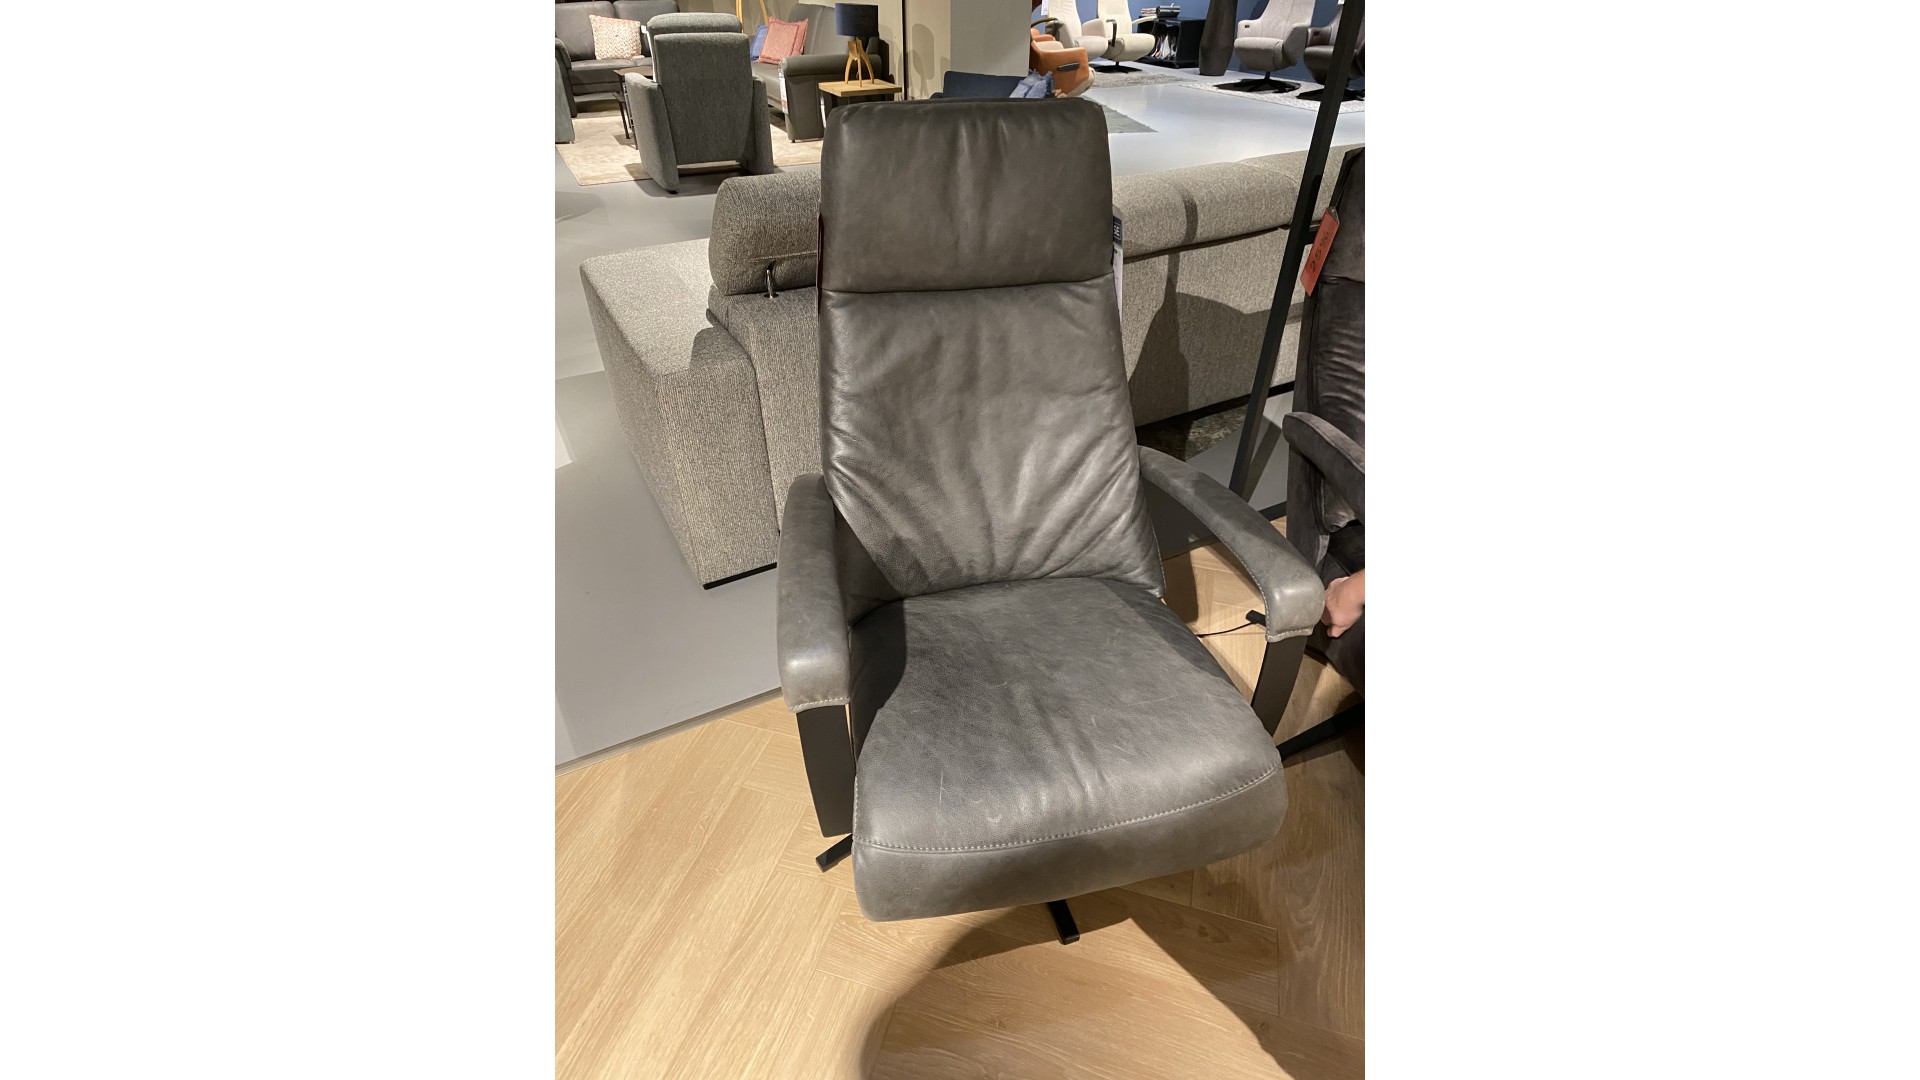 Lomani relaxfauteuil sta-op